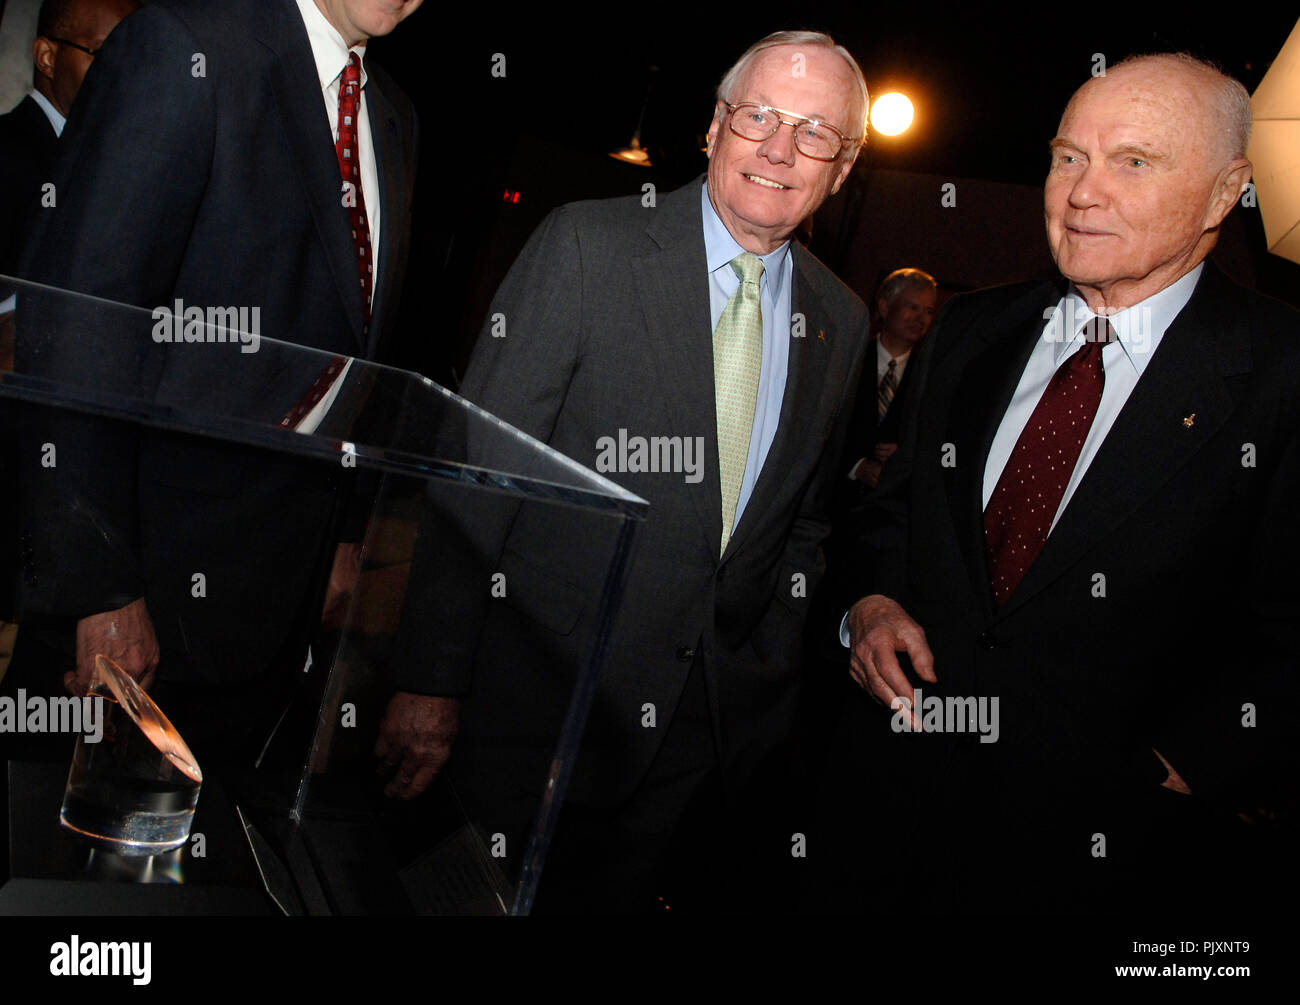 Apollo 11 astronaut Neil Armstrong (left) and Senator John Glenn (right) look at the Moon rock display at the Cincinnati Museum center.  NASA Administrator Michael Griffin presented the NASA Ambassadors of Exploration award to Neil Armstrong.  Armstrong received the award that includes a moon rock to recognize the sacrifices and dedication of the astronauts and others who were part of the Mercury, Gemini and Apollo programs. A former naval aviator, NASA test pilot and Apollo 11 commander, Armstrong was the first human to ever land a spacecraft on the moon and the first to step on the lunar sur Stock Photo